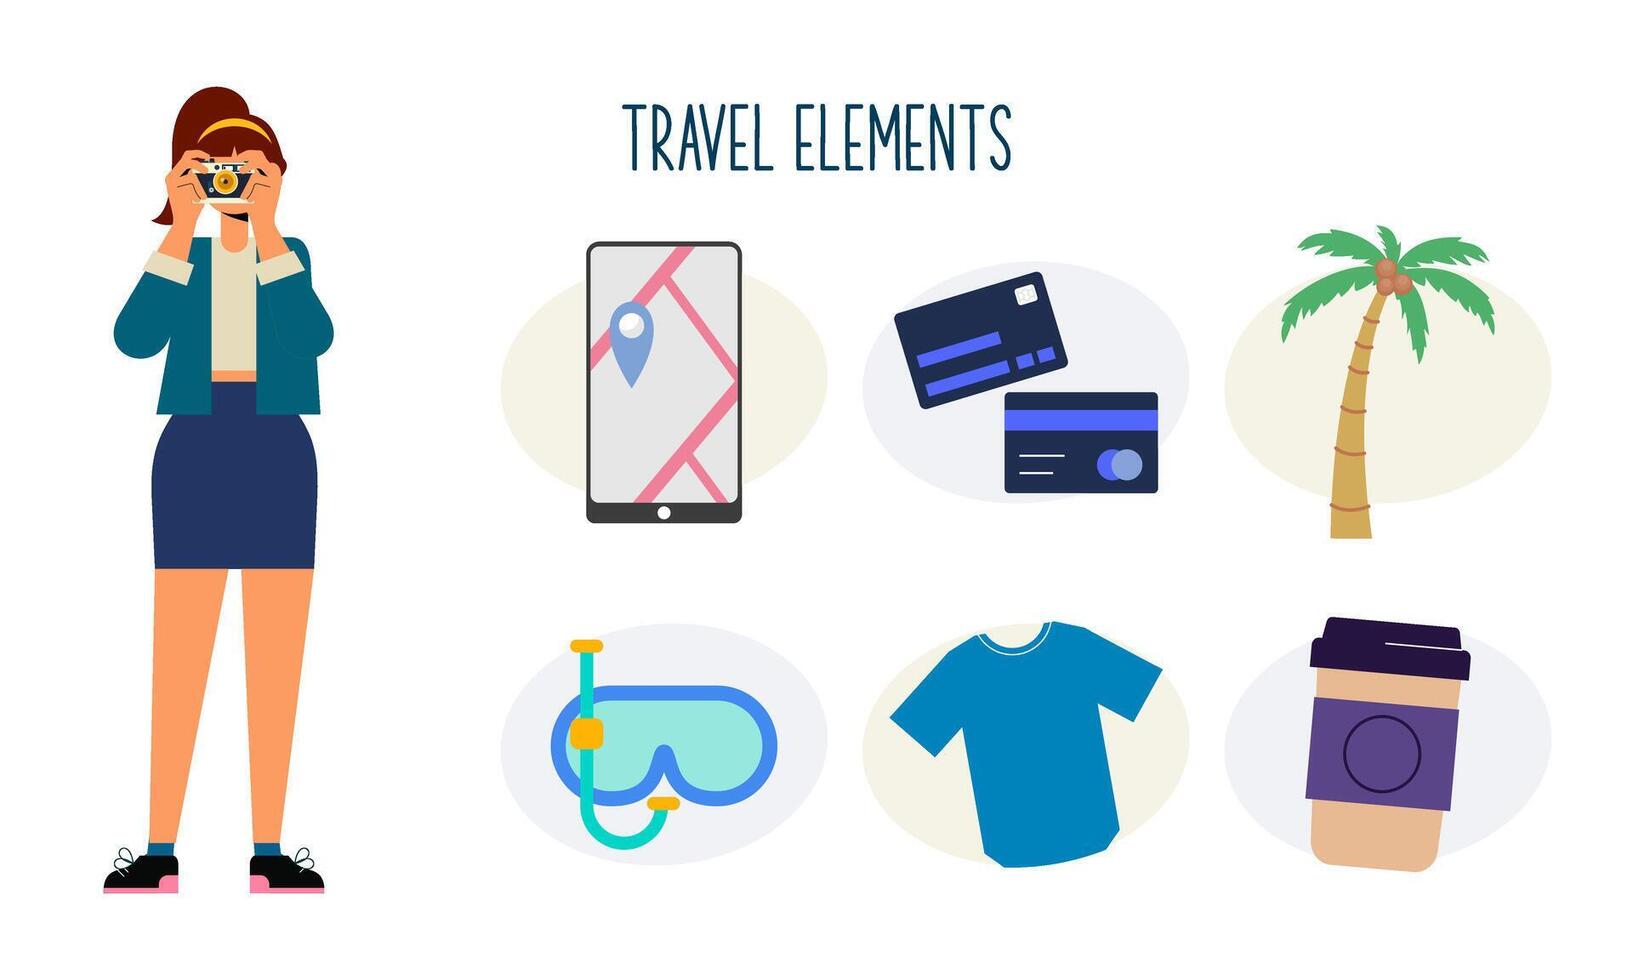 Travel elements logo collection vector